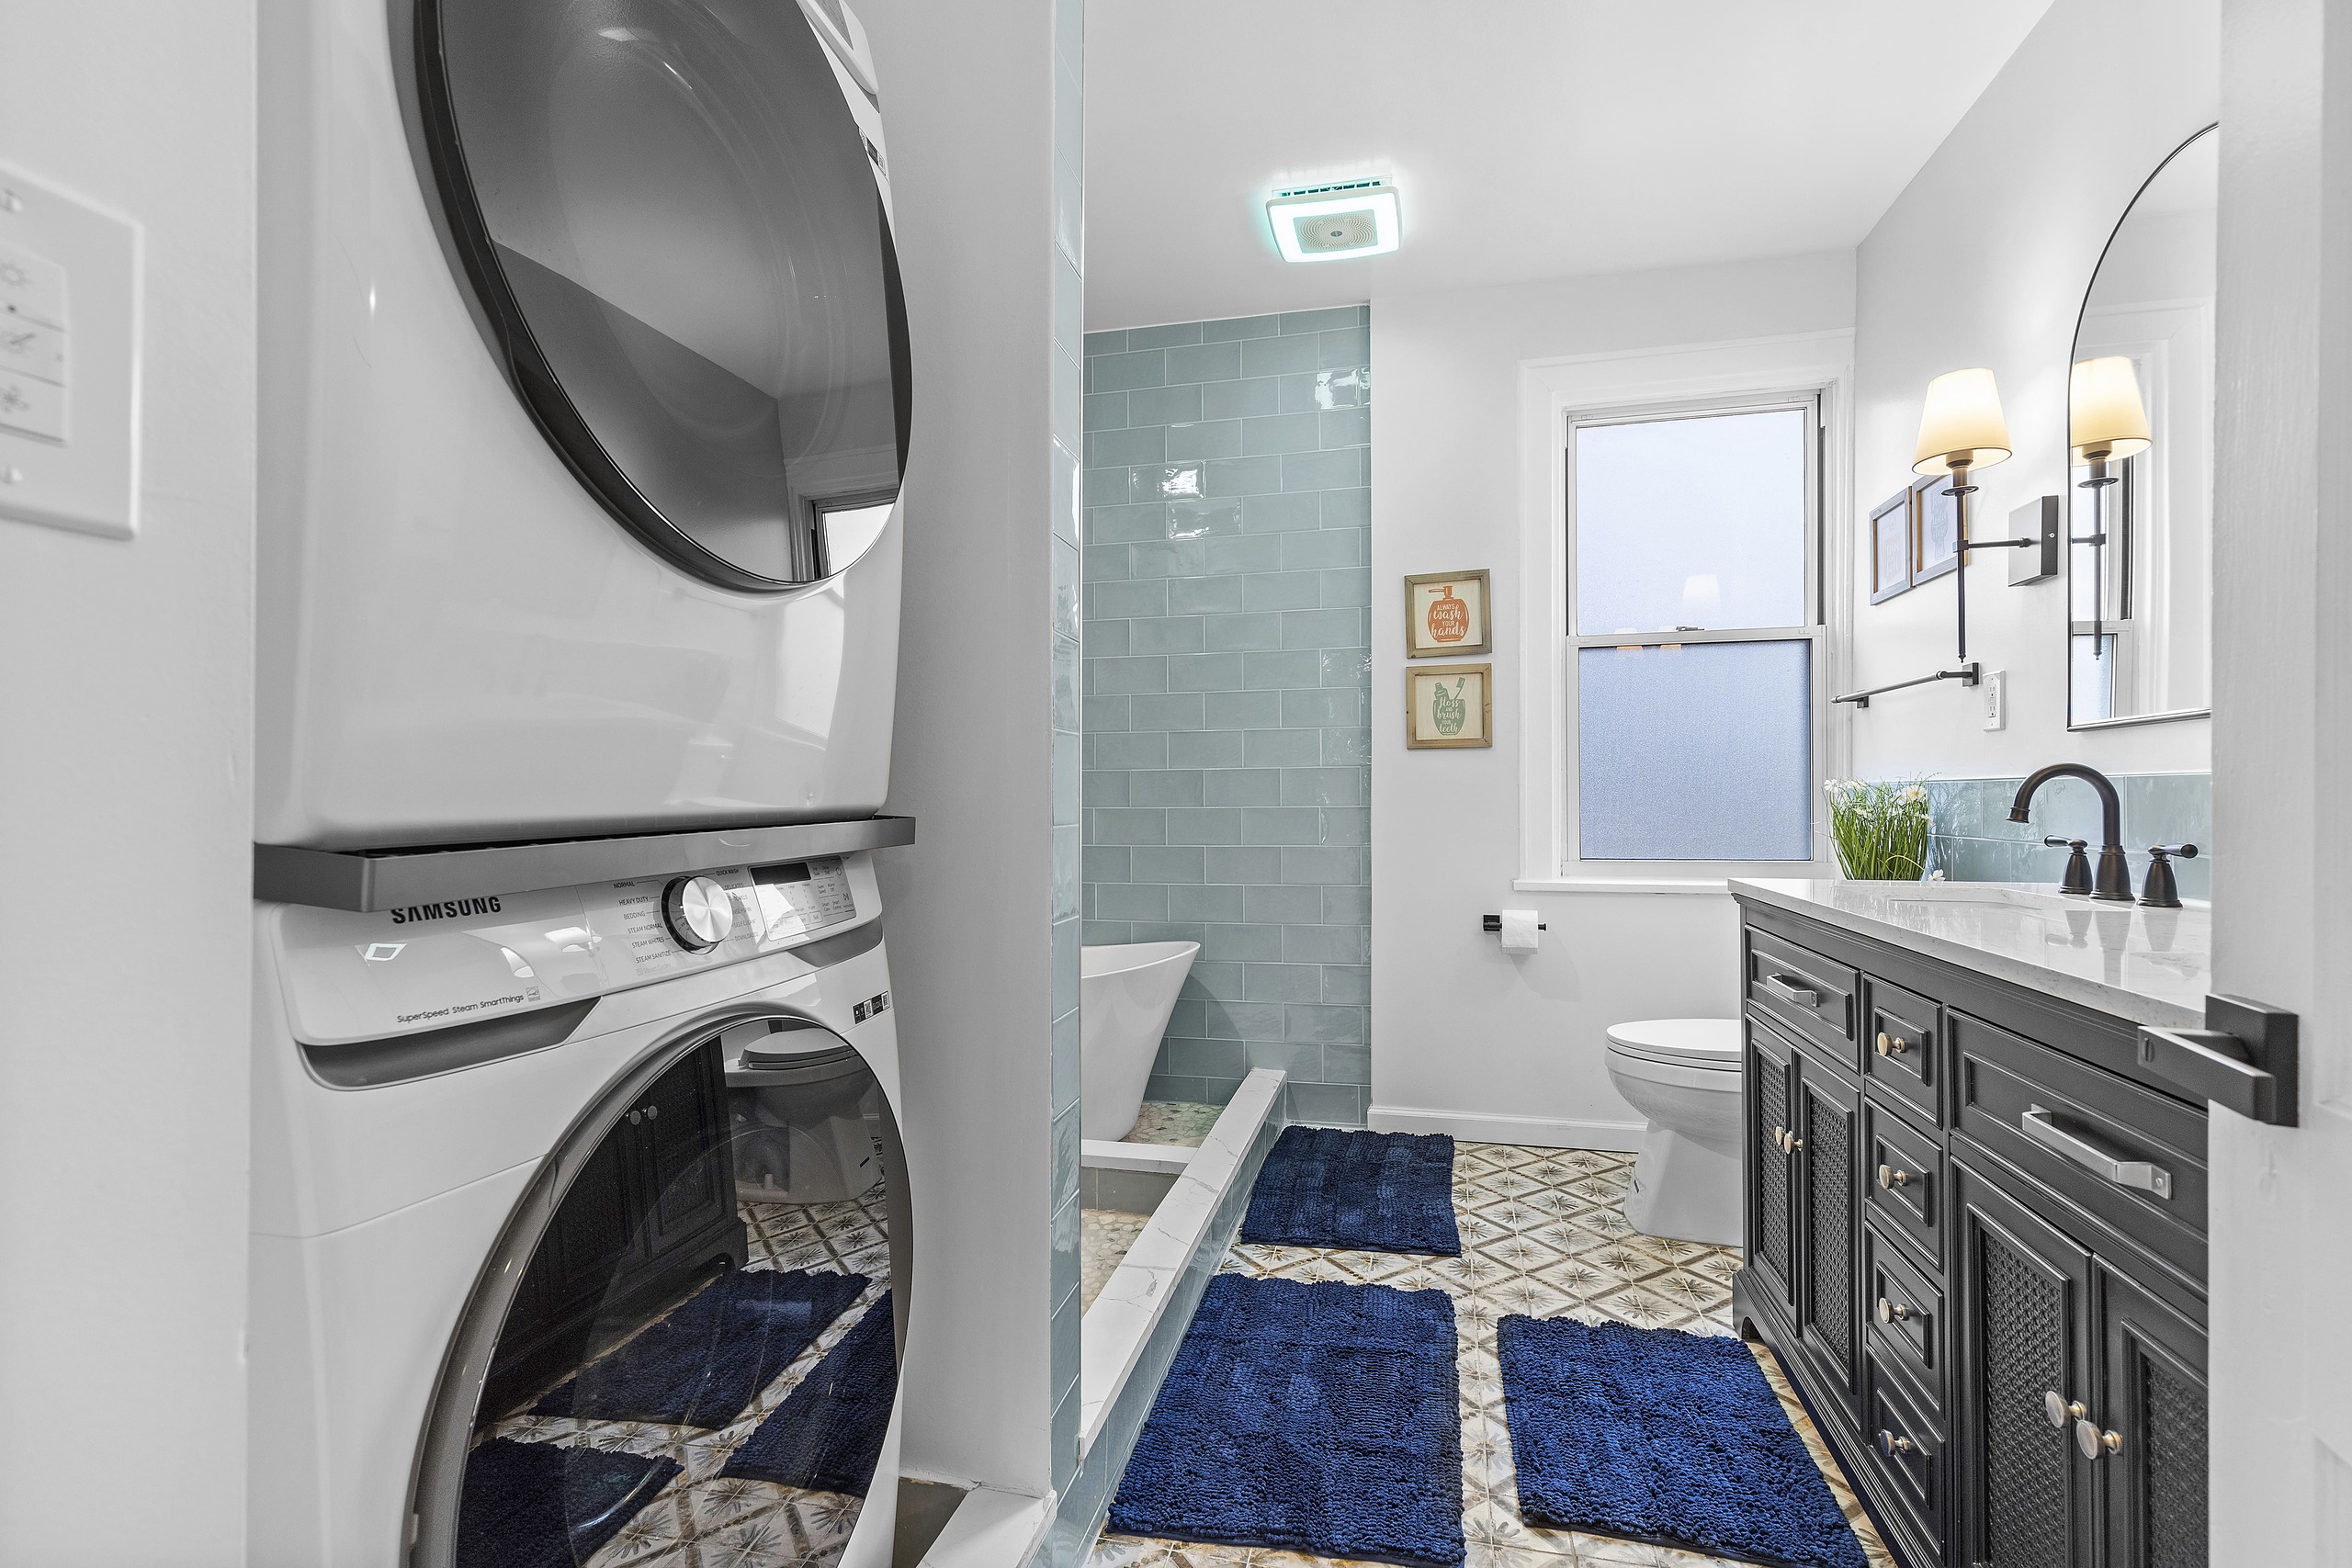 After renovation, a modern and stylish vacation rental bathroom with a blue tile shower and sleek dark vanity.